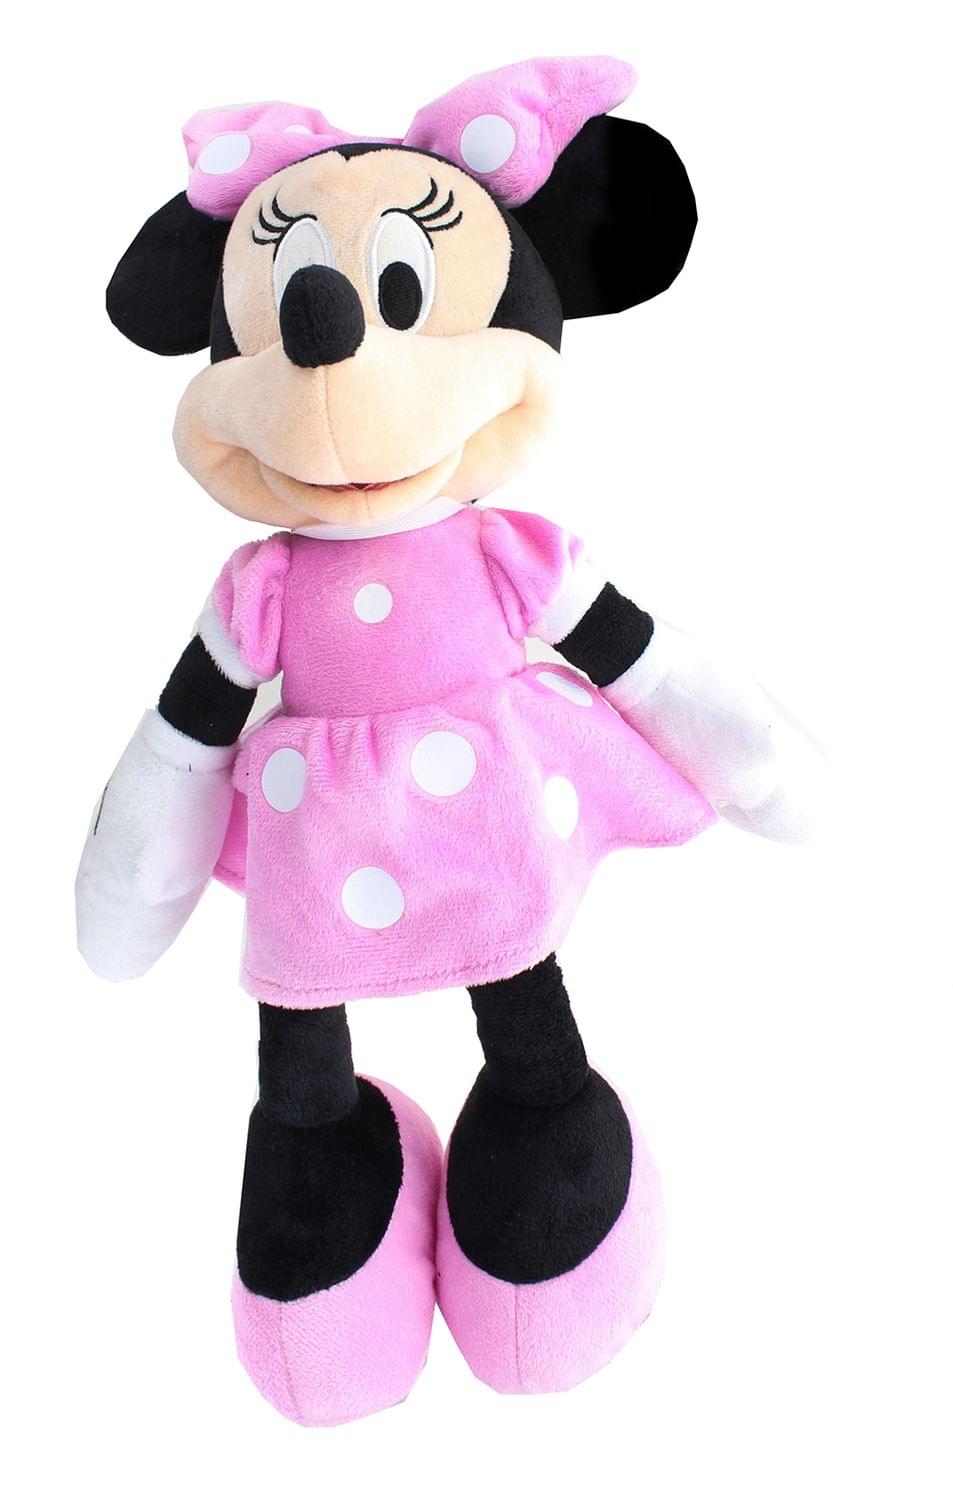 Mickey Mouse Clubhouse 9-inch Plush 5-pack, Mickey Mouse, Minnie